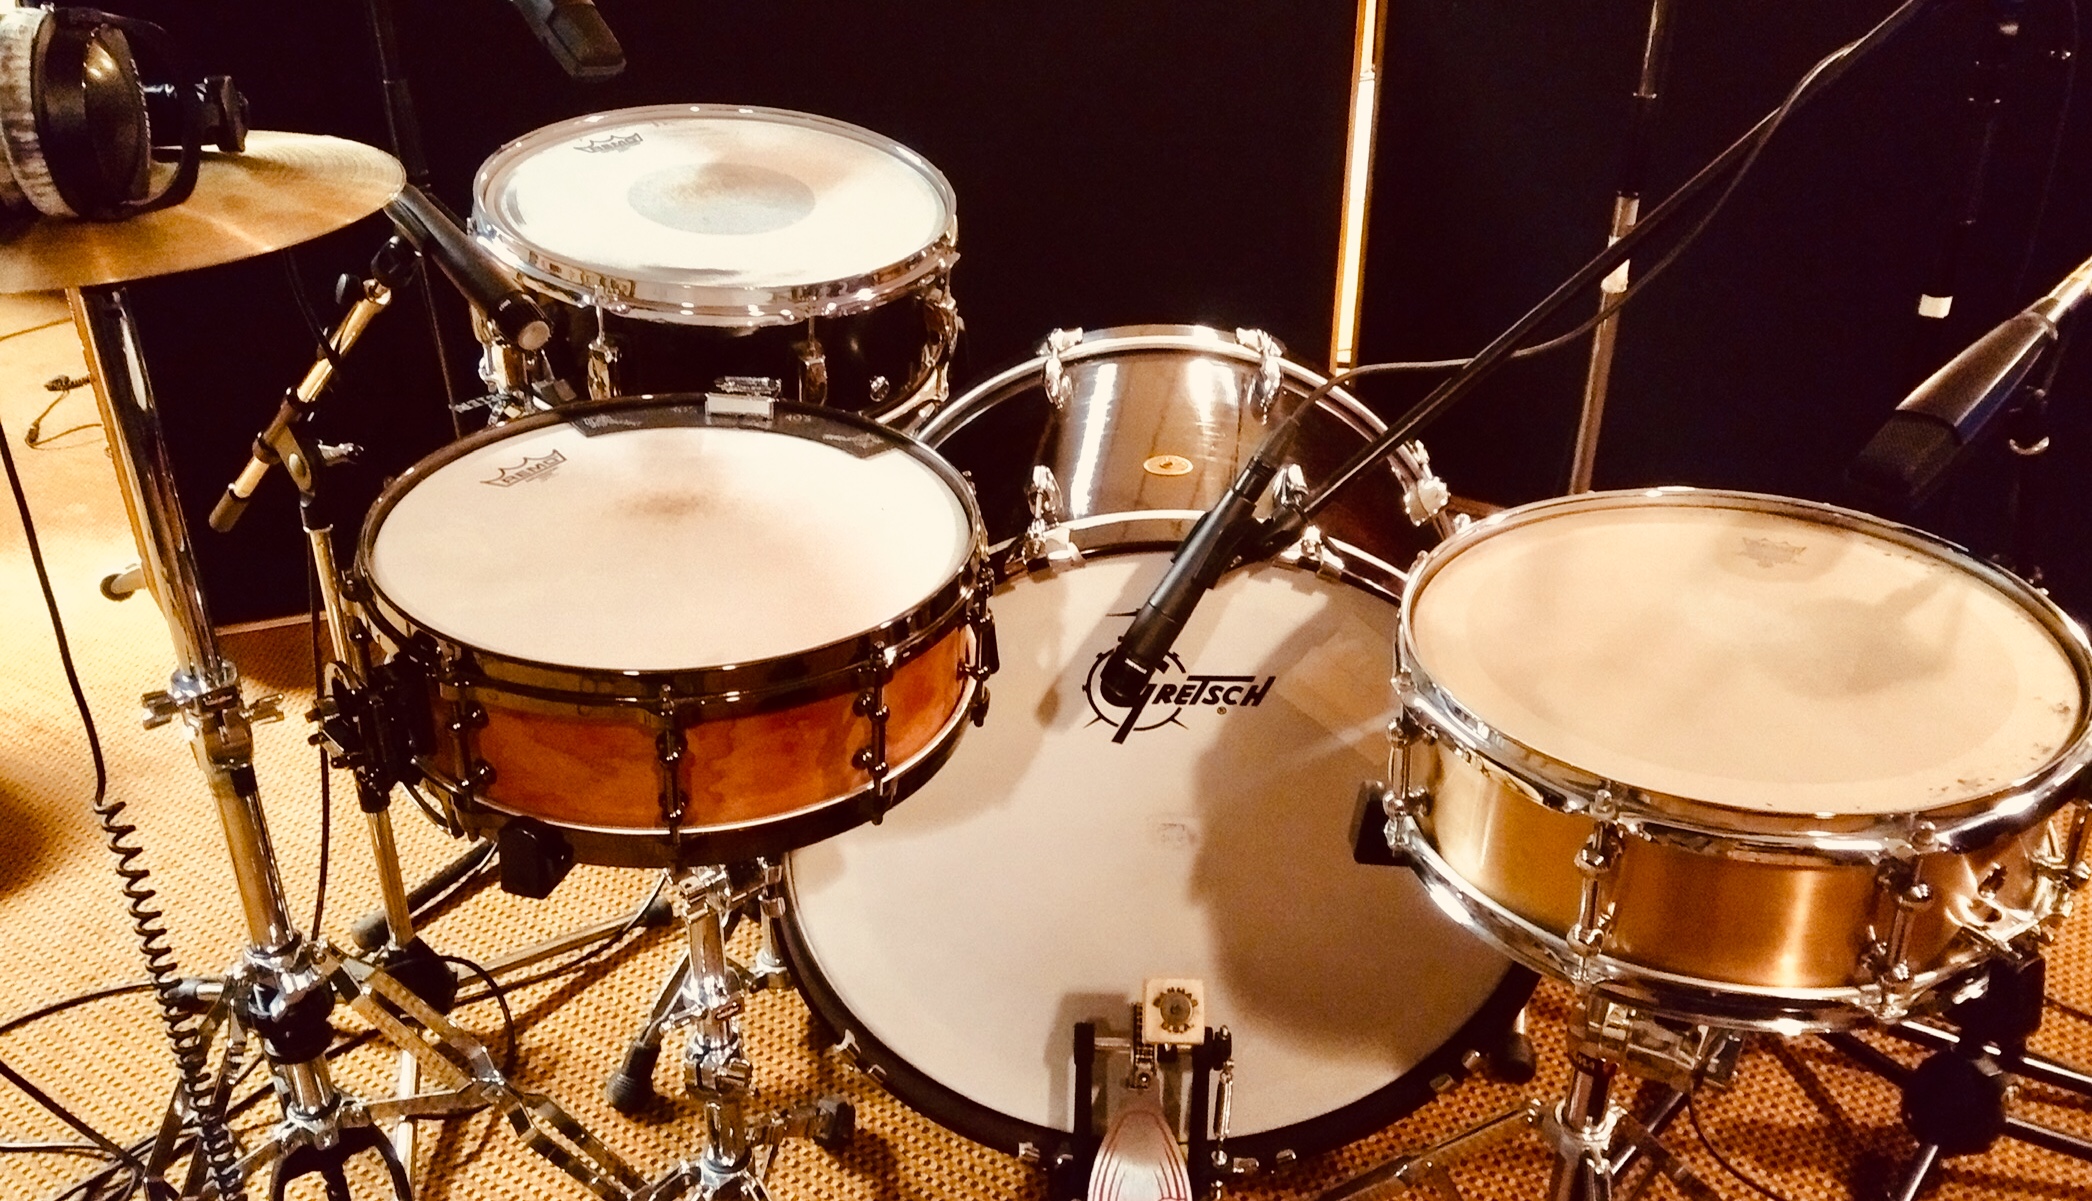 AUTOMAT Recording Set Up 2019 @Candybomber Studios using a Gretsch USA Custom Bassdrum, a Beier 5.5"x14" Steel Snaredrum, a Tempest 5"x14" BellBrass Snare Drum, and a 101 Diamond Snare in 4.5"x14"... plus Istanbul Mehmet Nostalgia HiHats in 14"